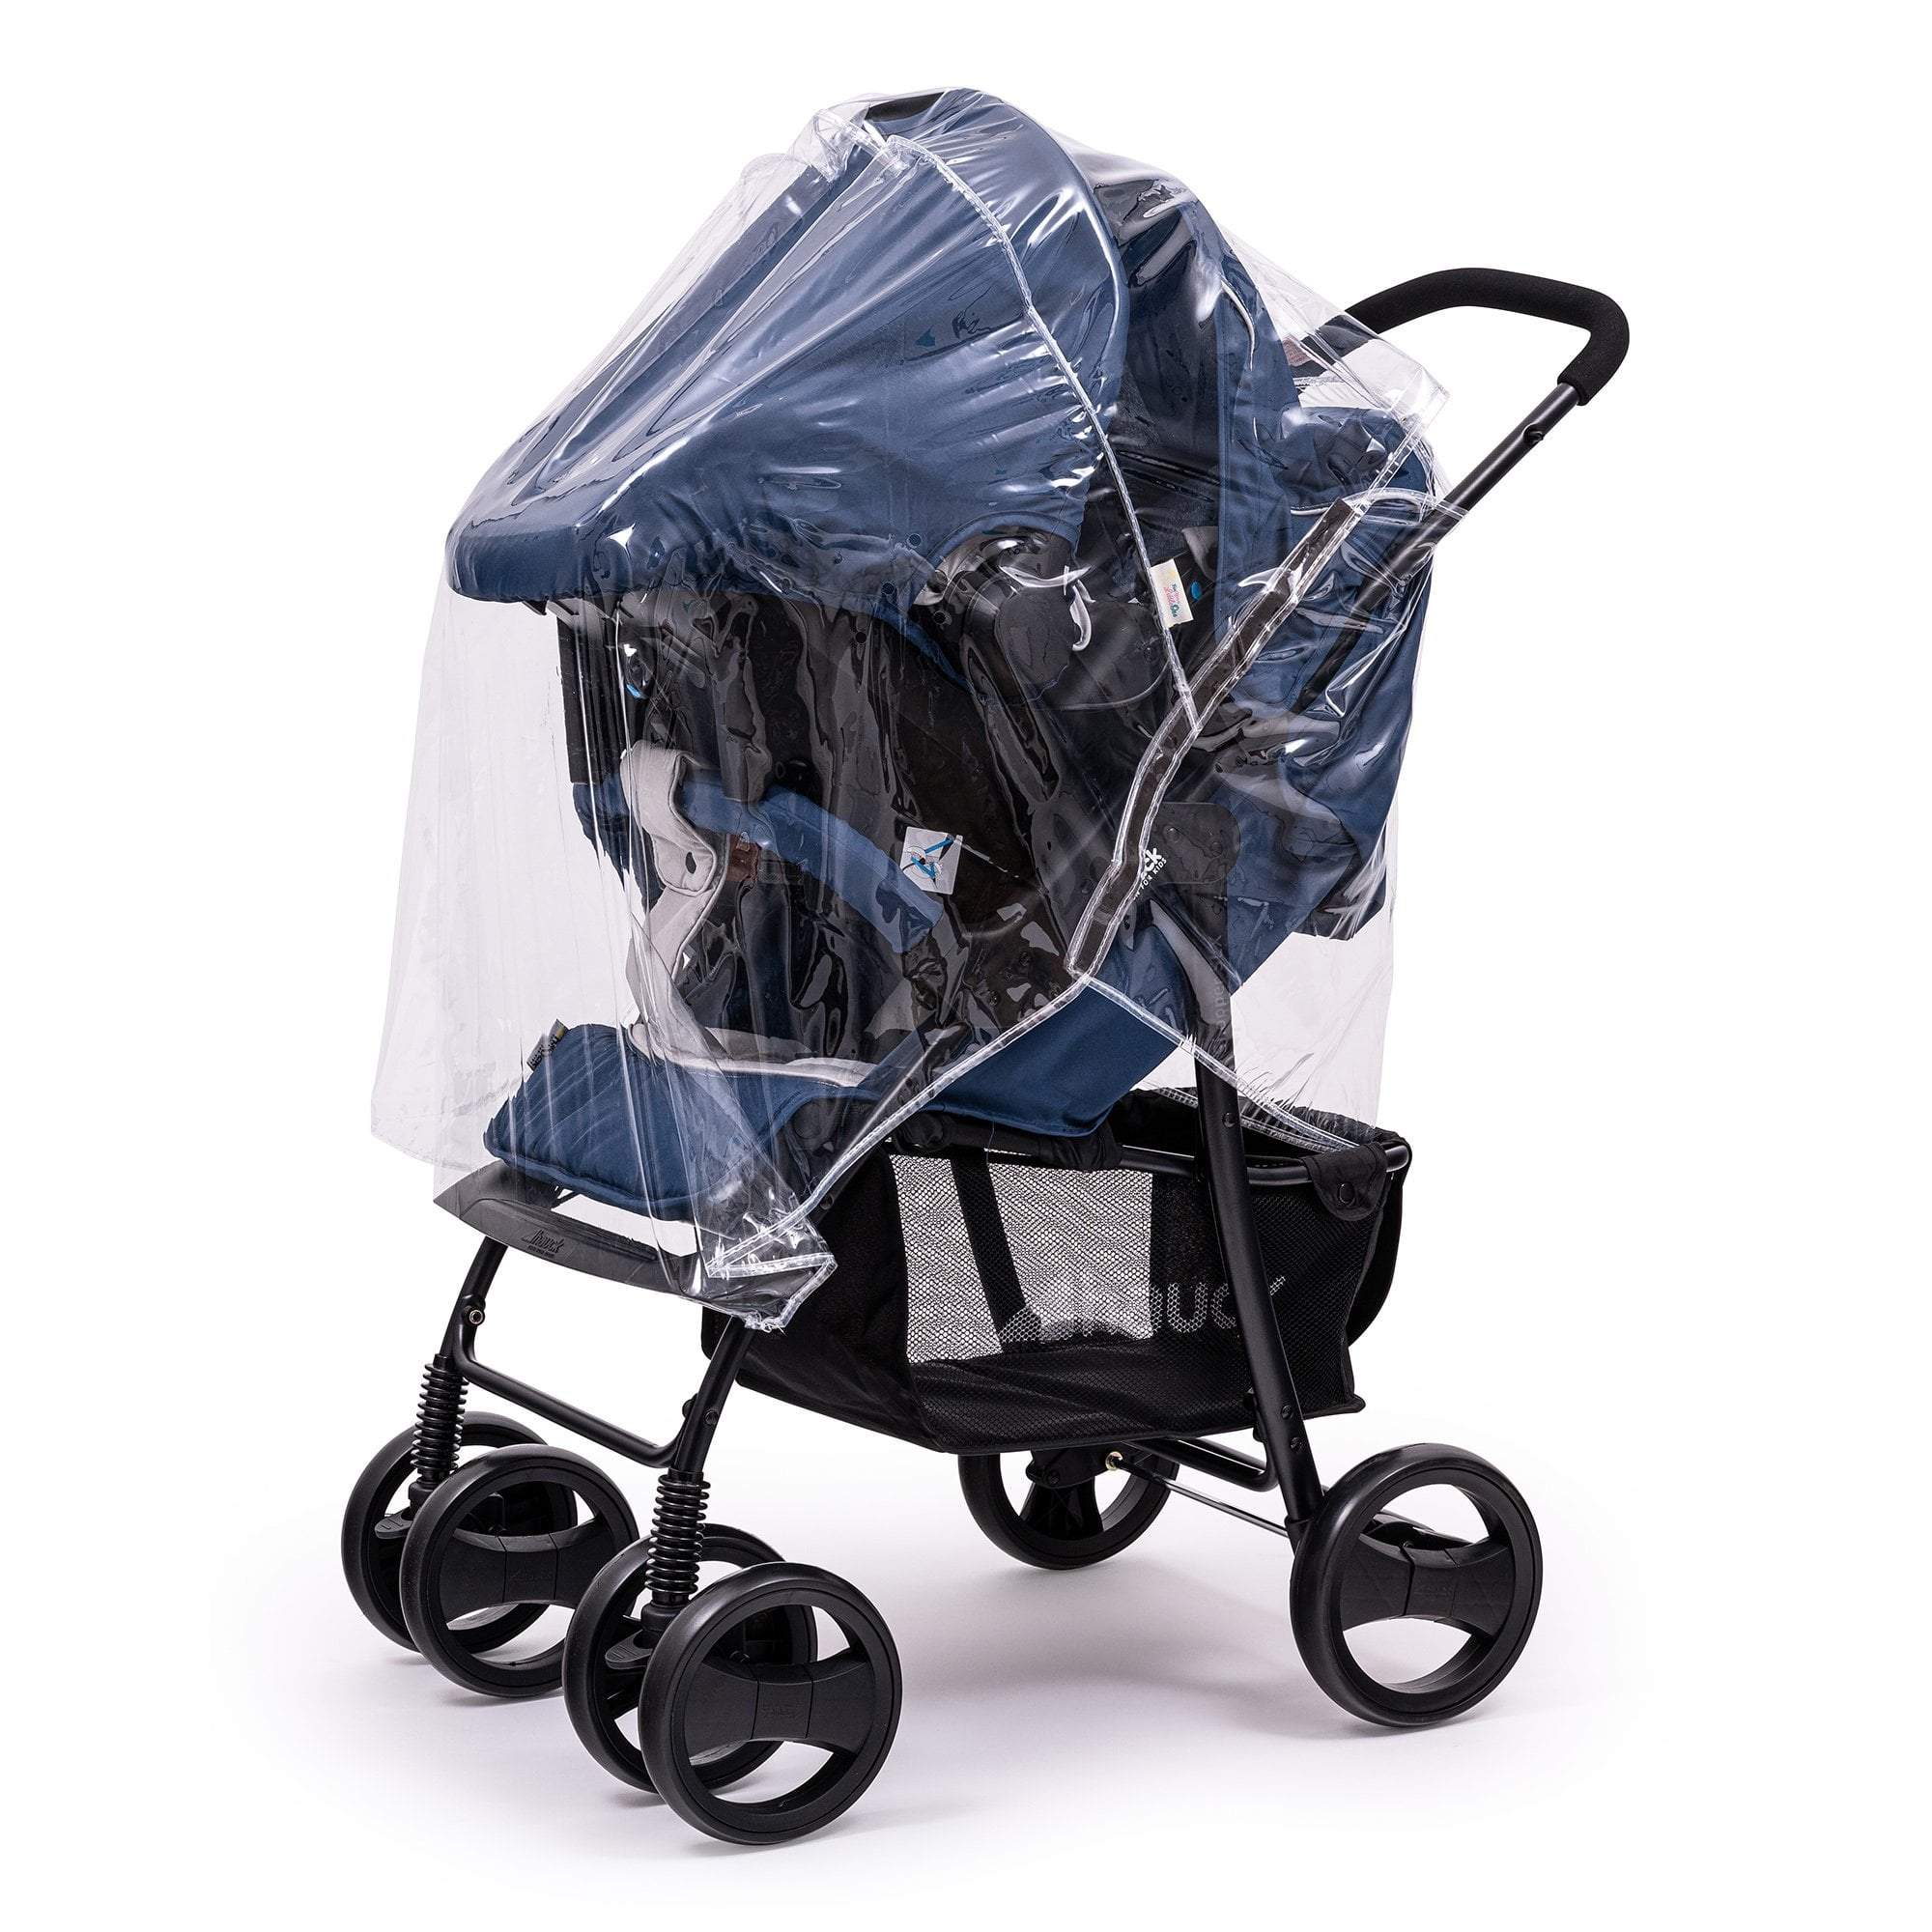 Travel System Raincover Compatible with Bebecar - Fits All Models - For Your Little One